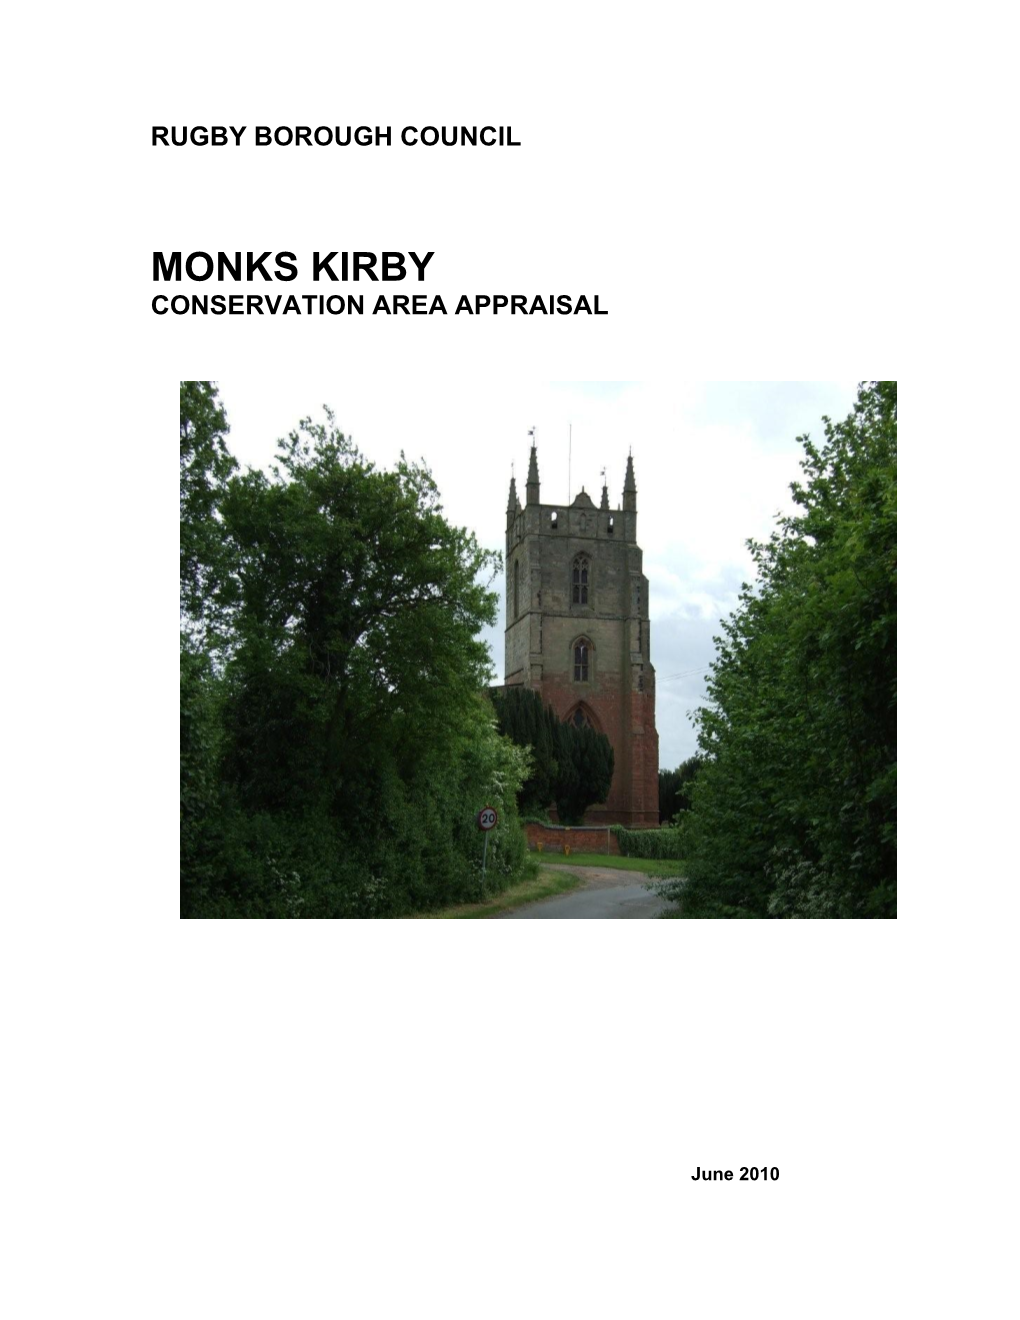 Monks Kirby Conservation Area Appraisal